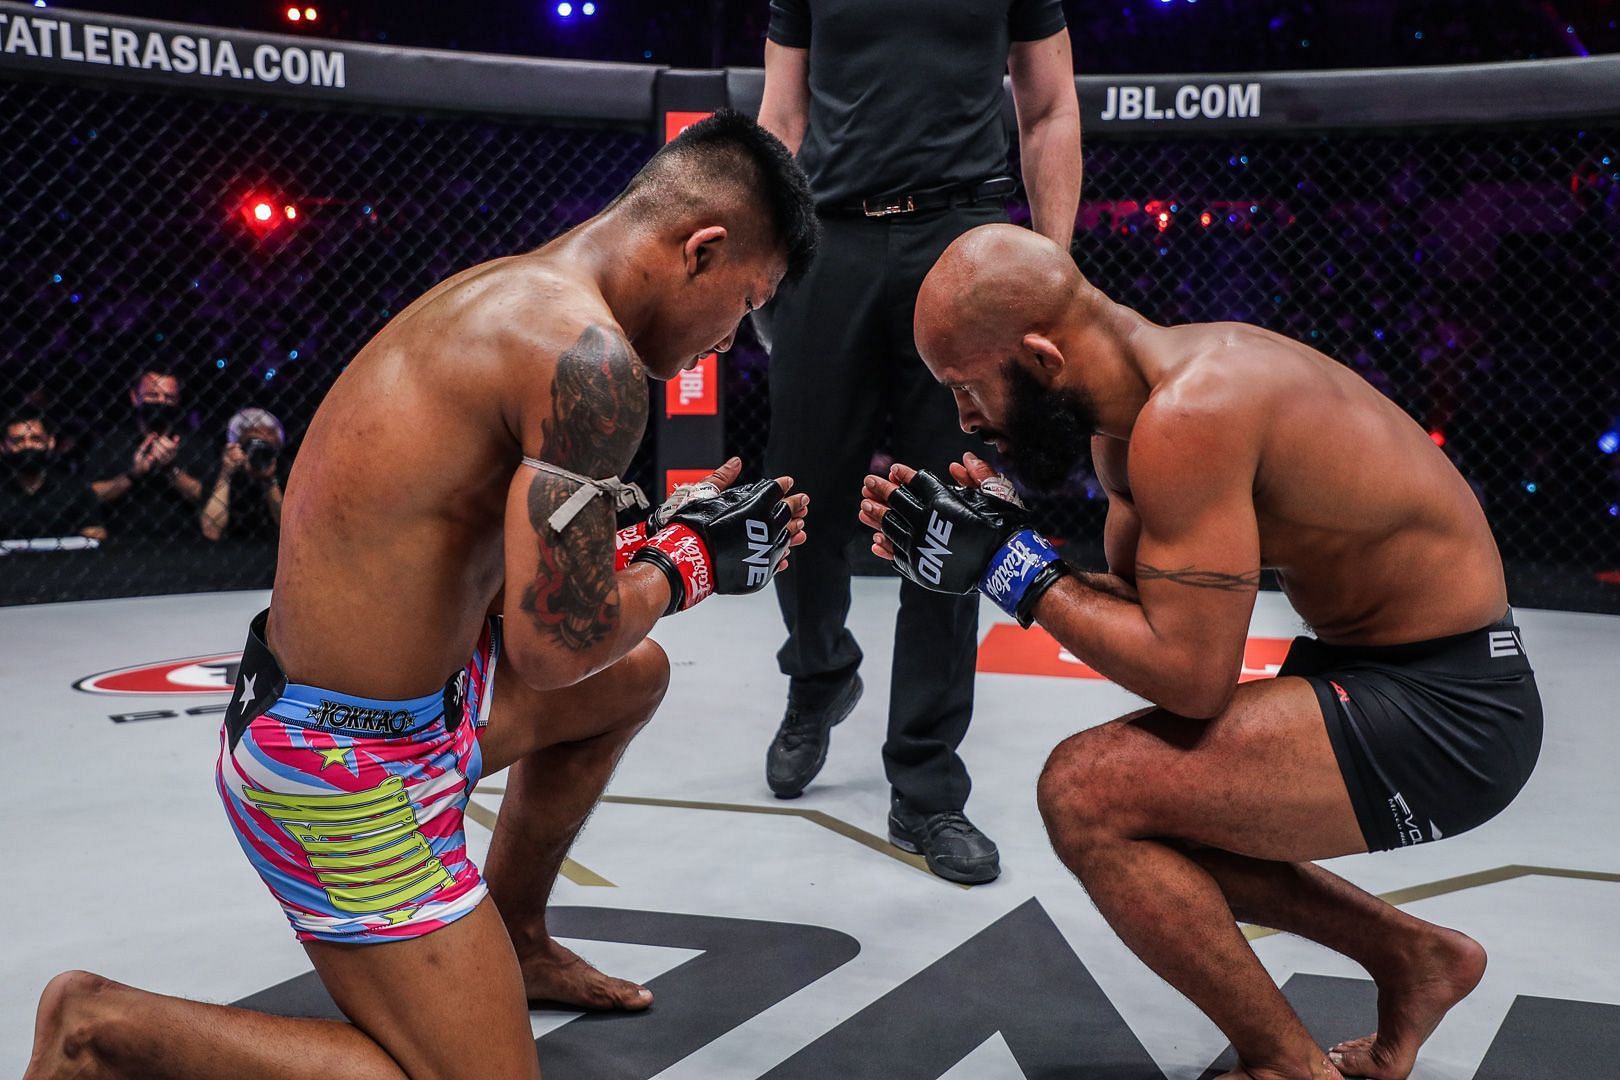 Rodtang Jitmuangnon (left) and Demetrious Johnson (right) at ONE X [Photo Credit: ONE Championship]